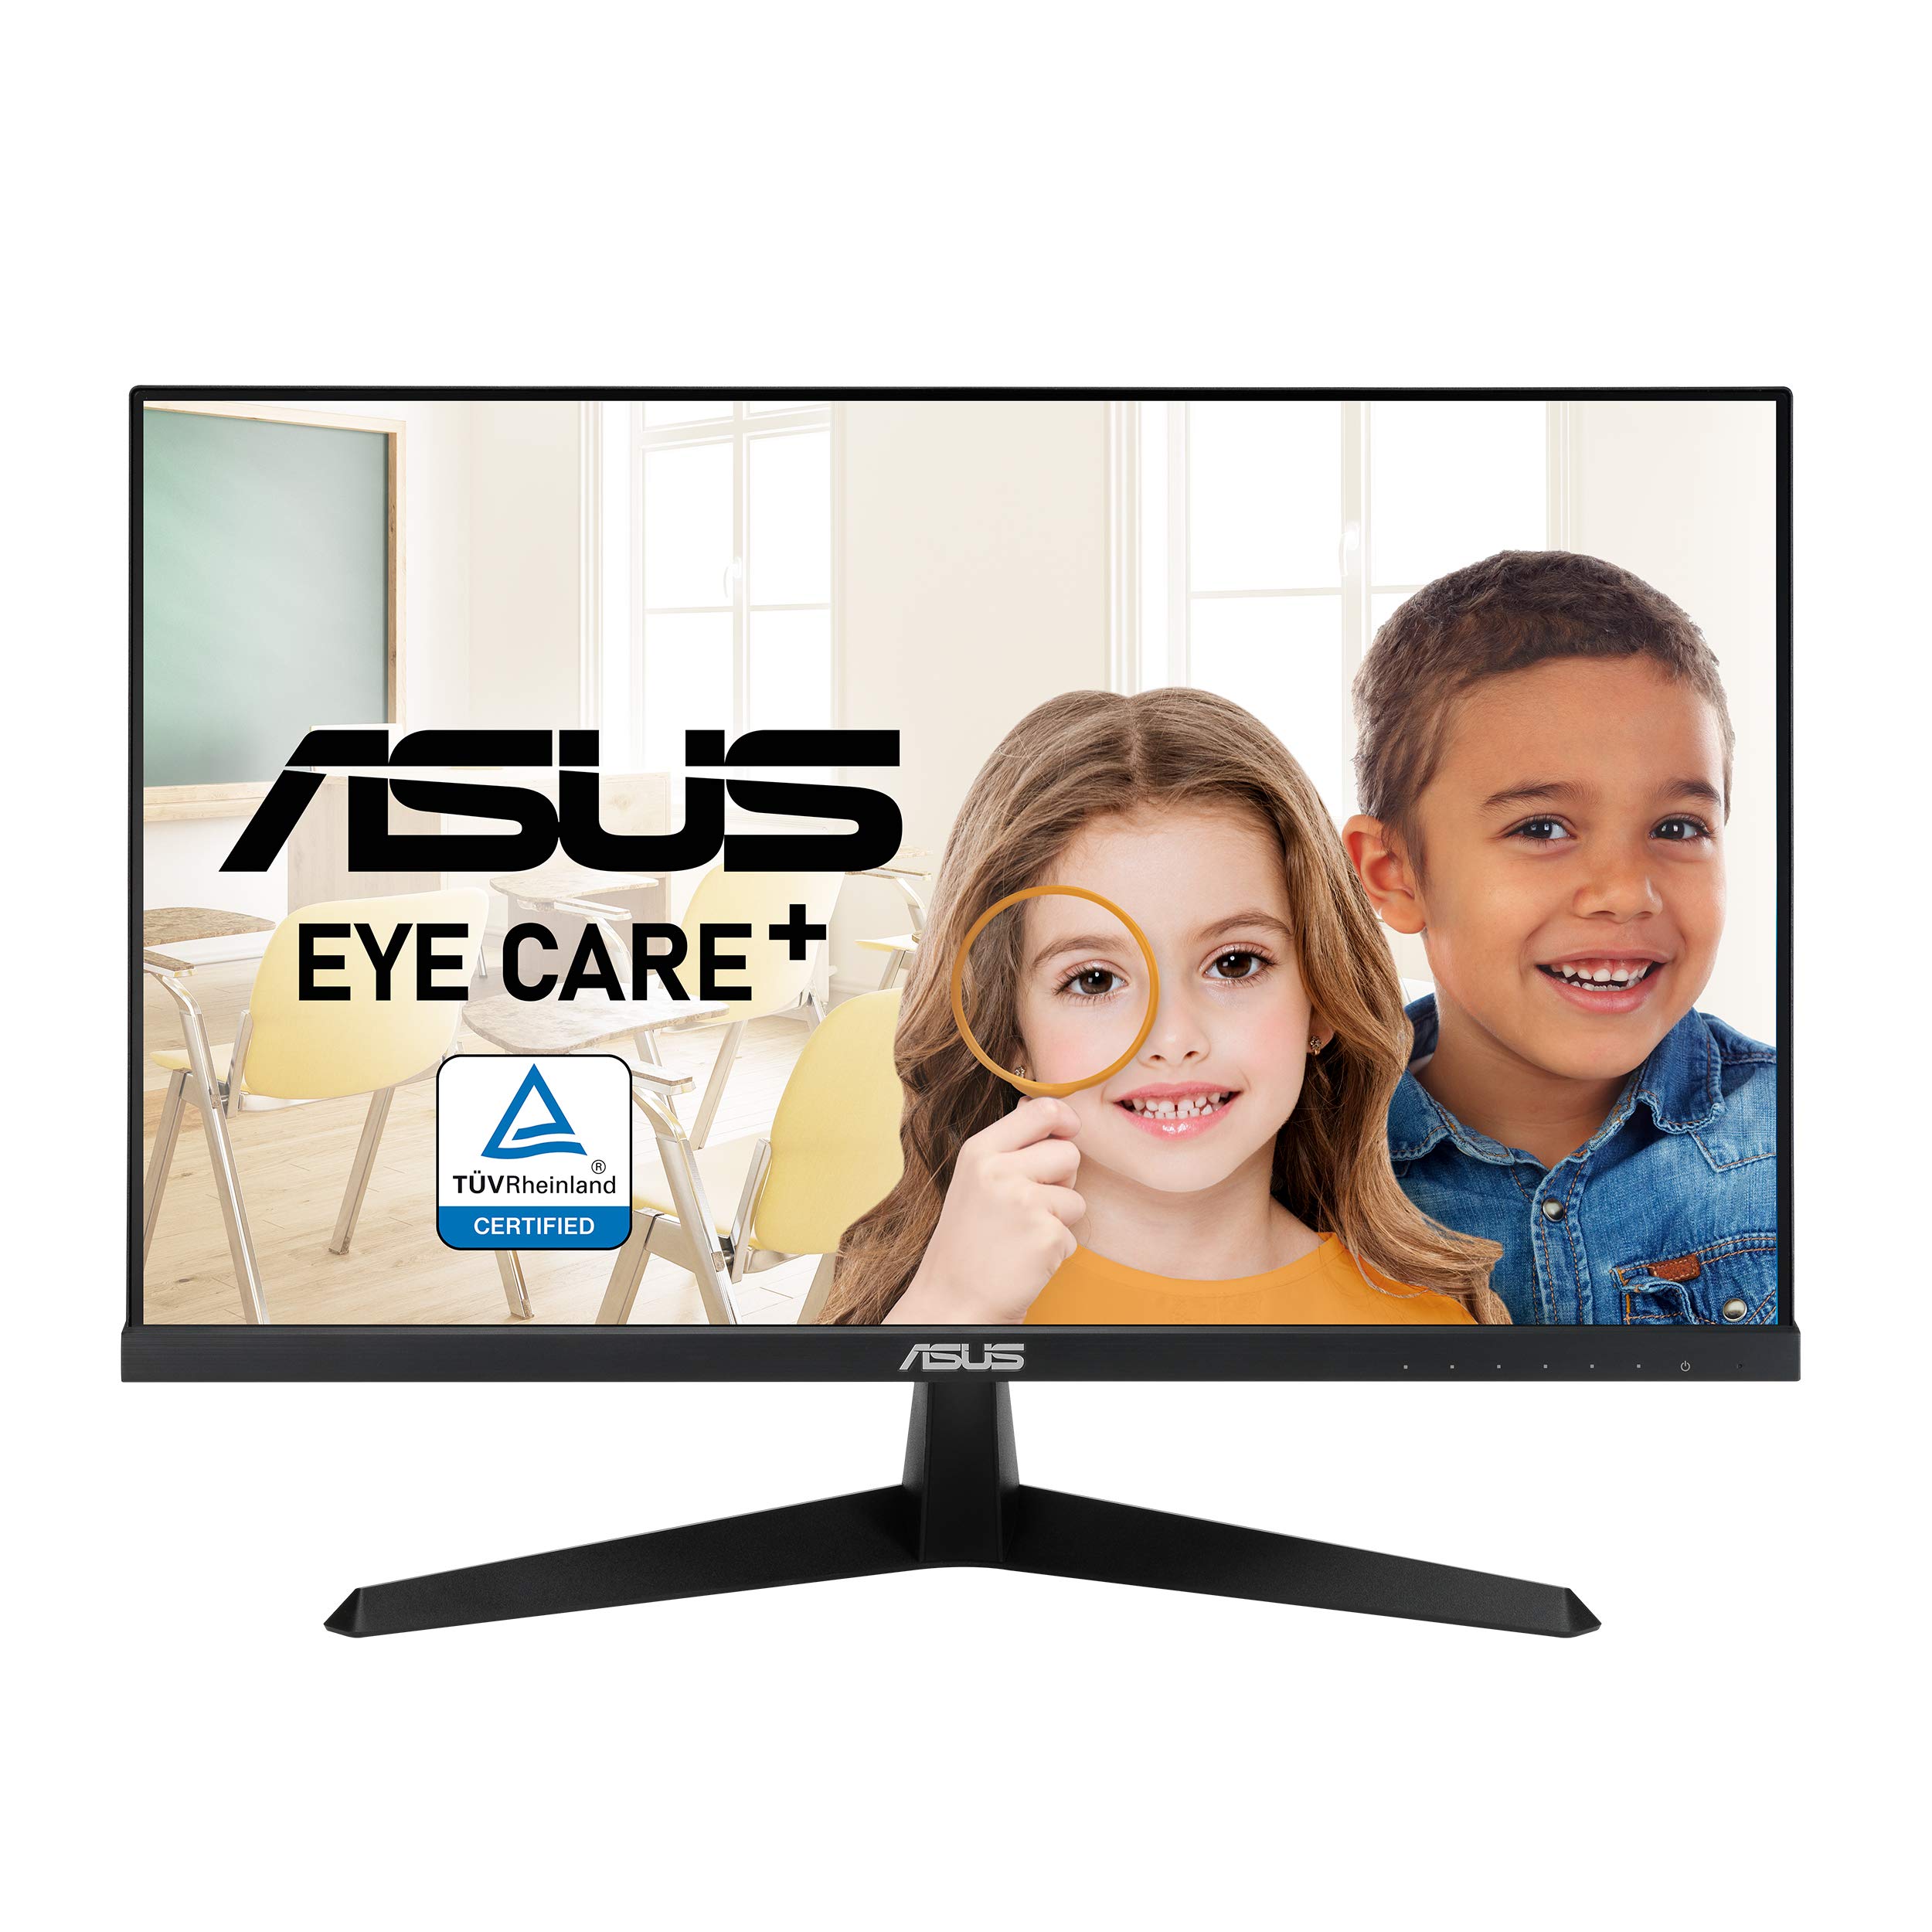 Asus VY249HE 23.8” Eye Care Monitor, 1080P Full HD, 75Hz, IPS, Adaptive-Sync/Sync, Eye Care Plus, Color Augmentation, Rest Reminder, HDMI VGA